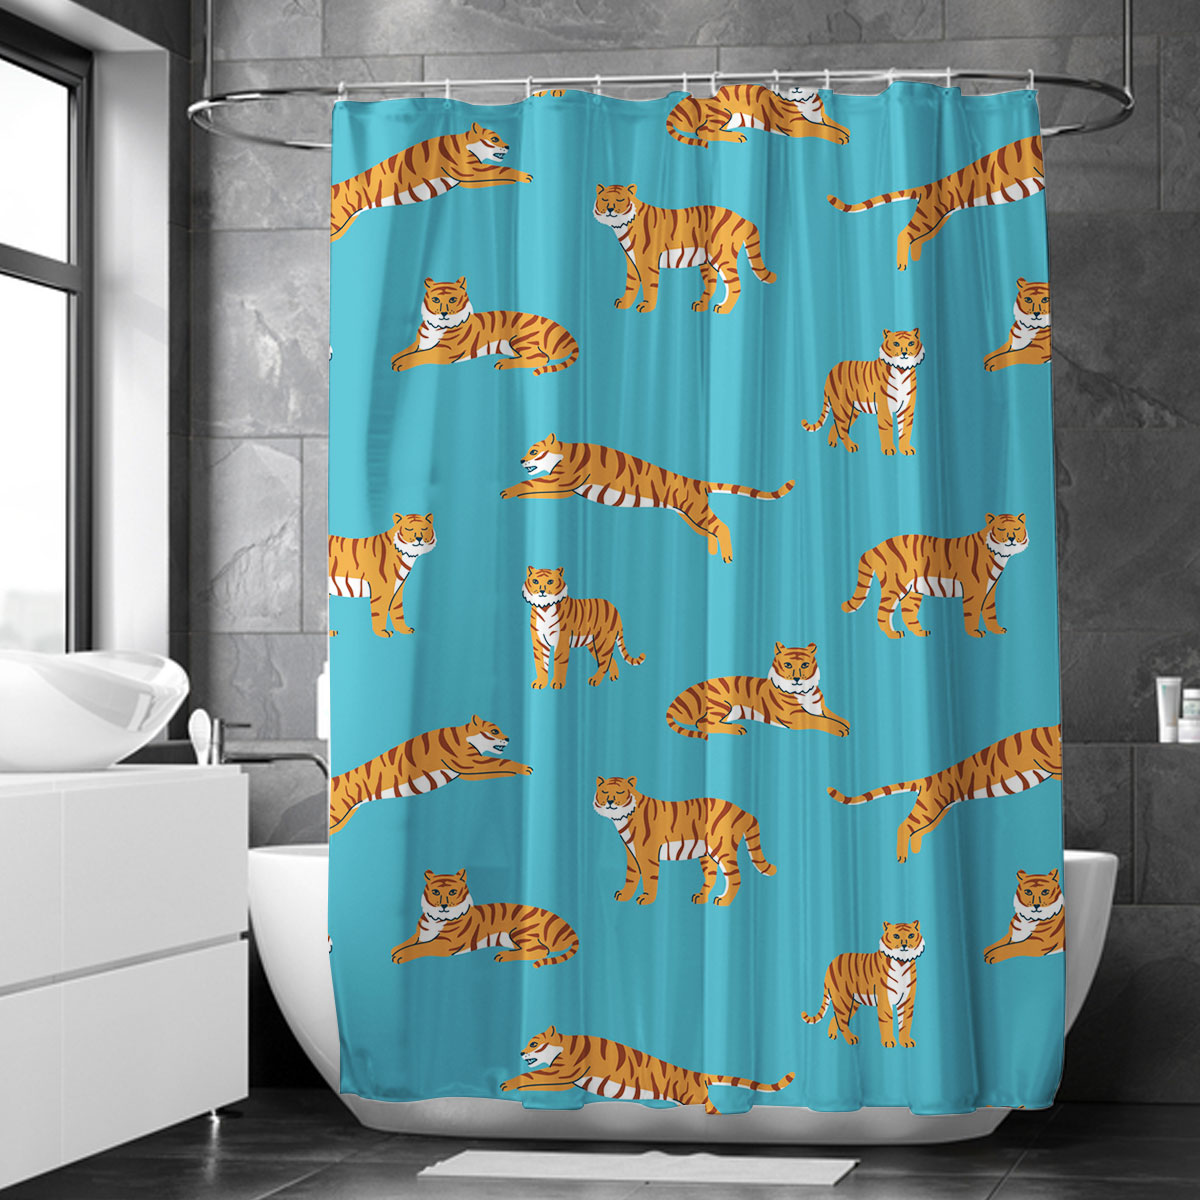 Peaceful Tiger Shower Curtain 6